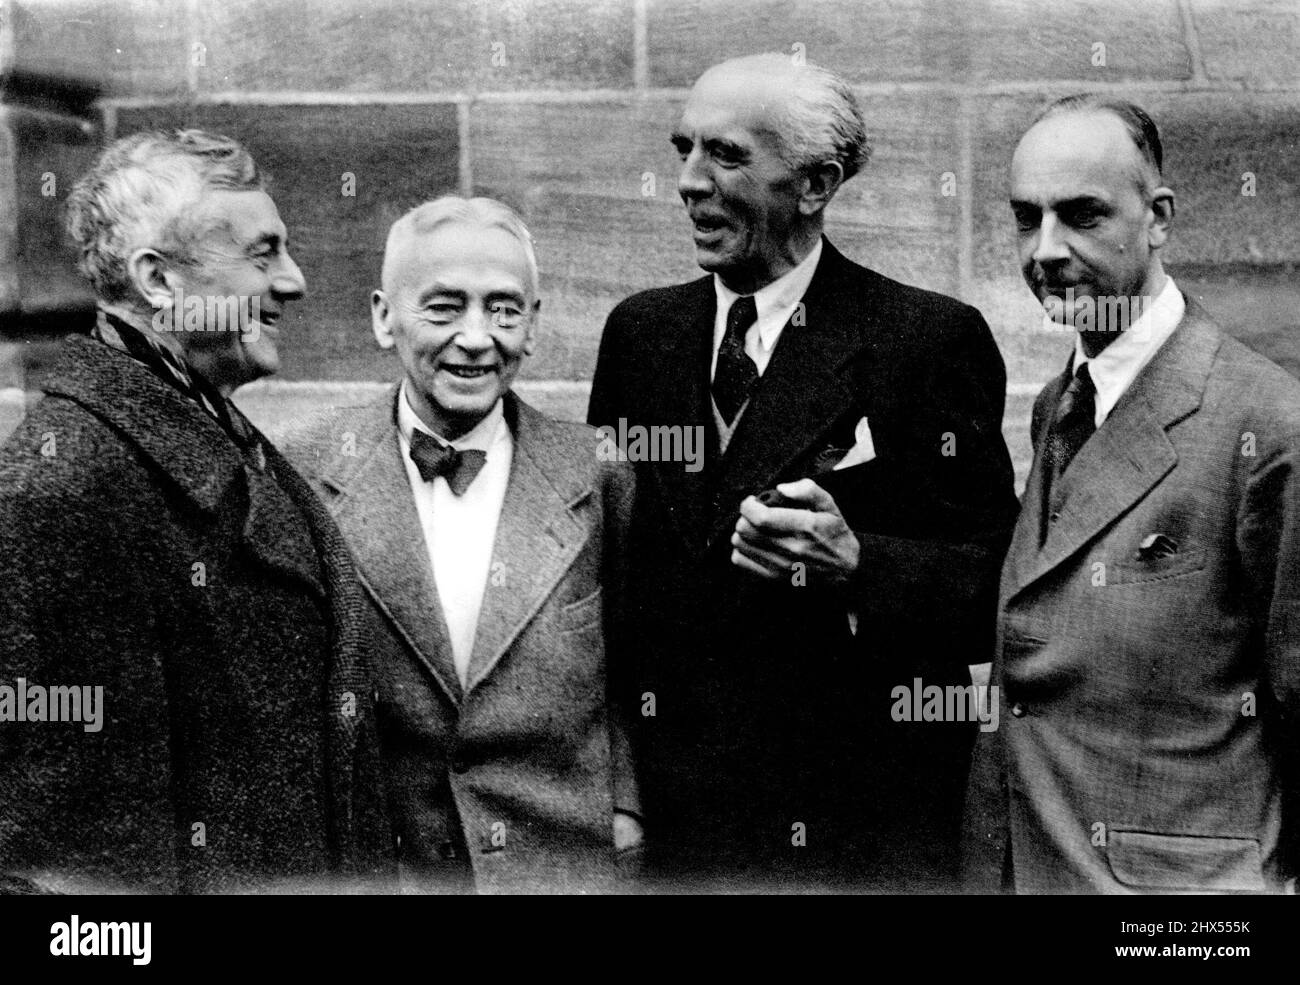 They Will Defend Leading German War Criminals -- The first picture of the German defence counsel who will defend the leading German war criminals to be placed on trial at Nuremburg next week Left to right are Dr. Hans Marx, defending Julius Streicher, the 'Jew Baiter'; Dr. Otto Stagier, defending Hermann Goering; Dr. Fritz Sauter, defending Joachim von Ribbentrop; and Dr. Gunther von Rohrscheidt defending Rudolf Hess - photographed outside the court at Nuremburg where the major war criminals will be tried. November 17, 1945. Stock Photo